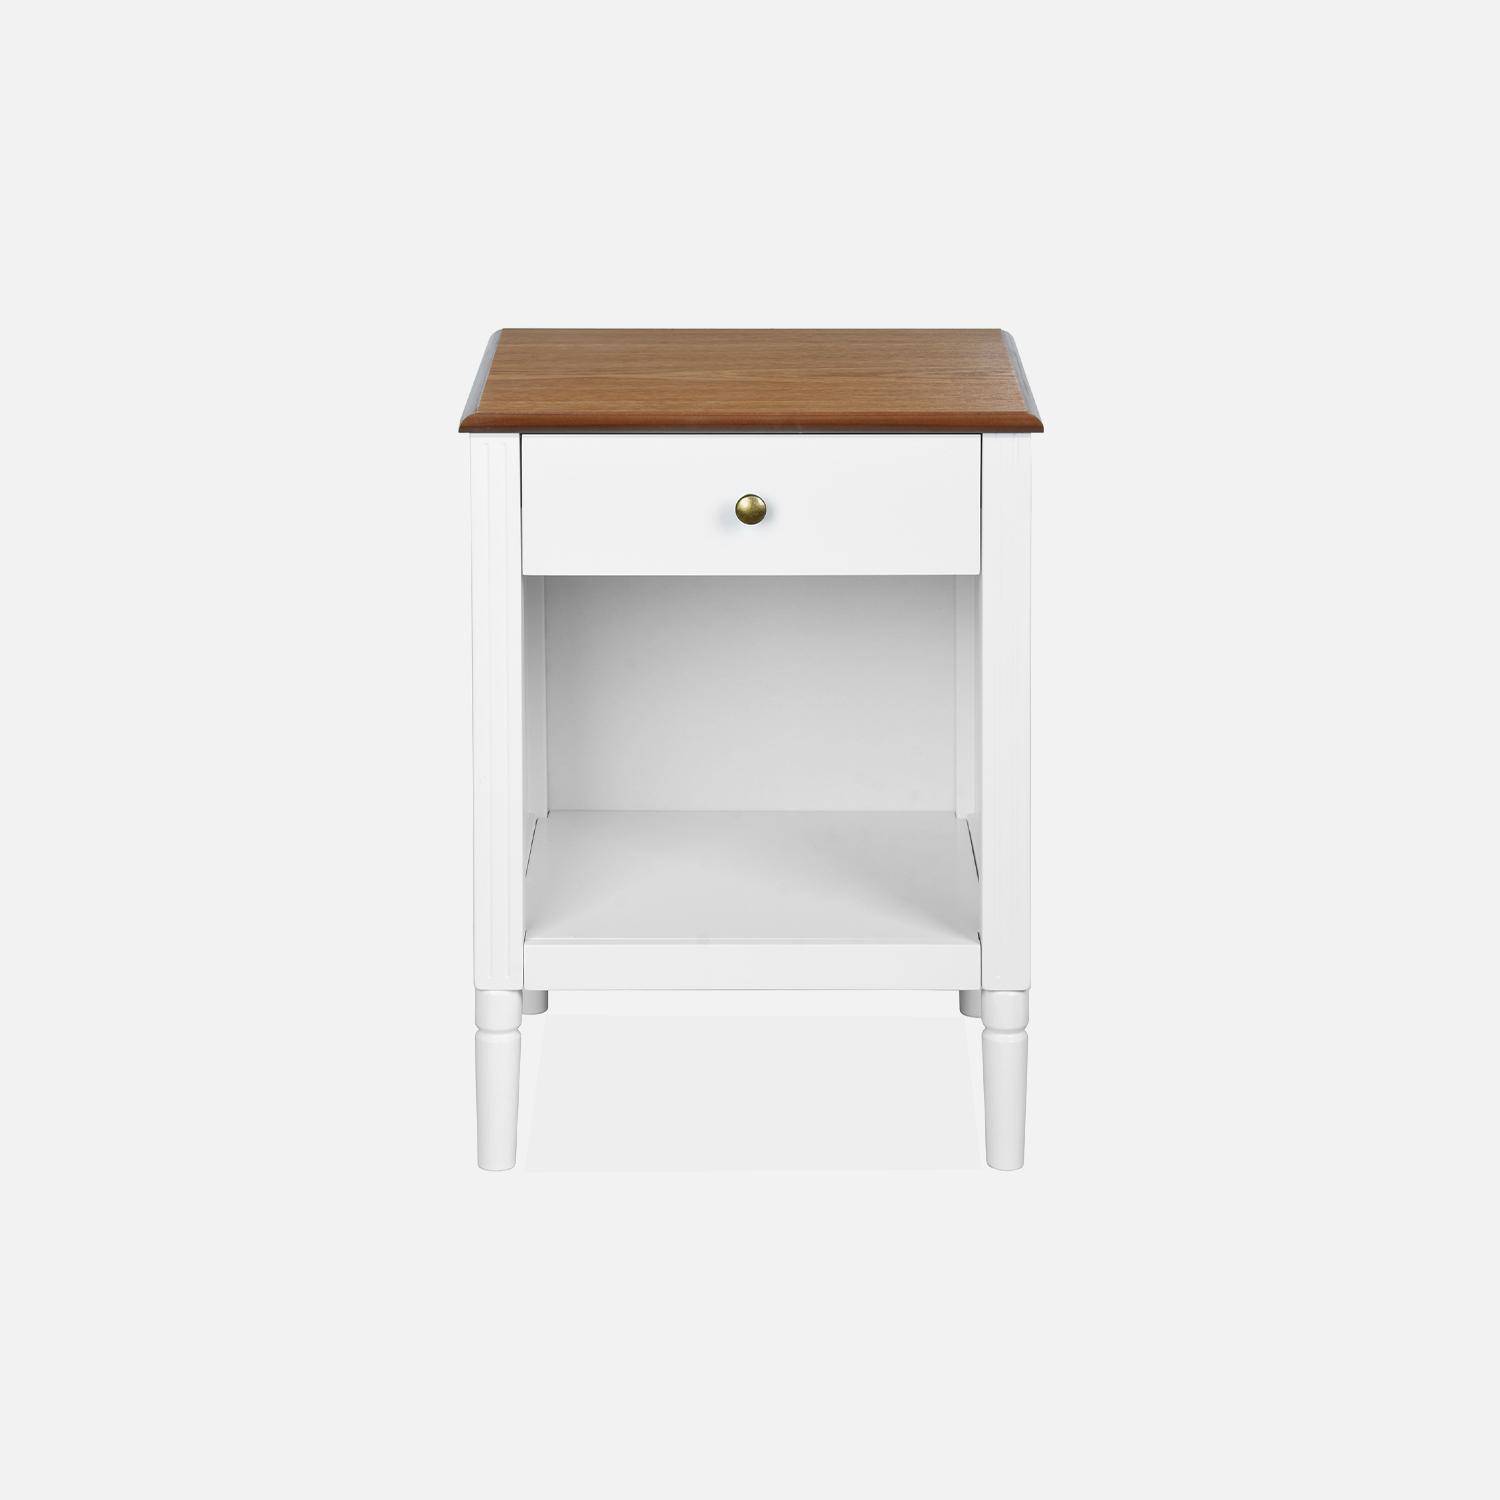 Bedside table with pinewood legs, 45x40x60cm - Celeste - White Photo4